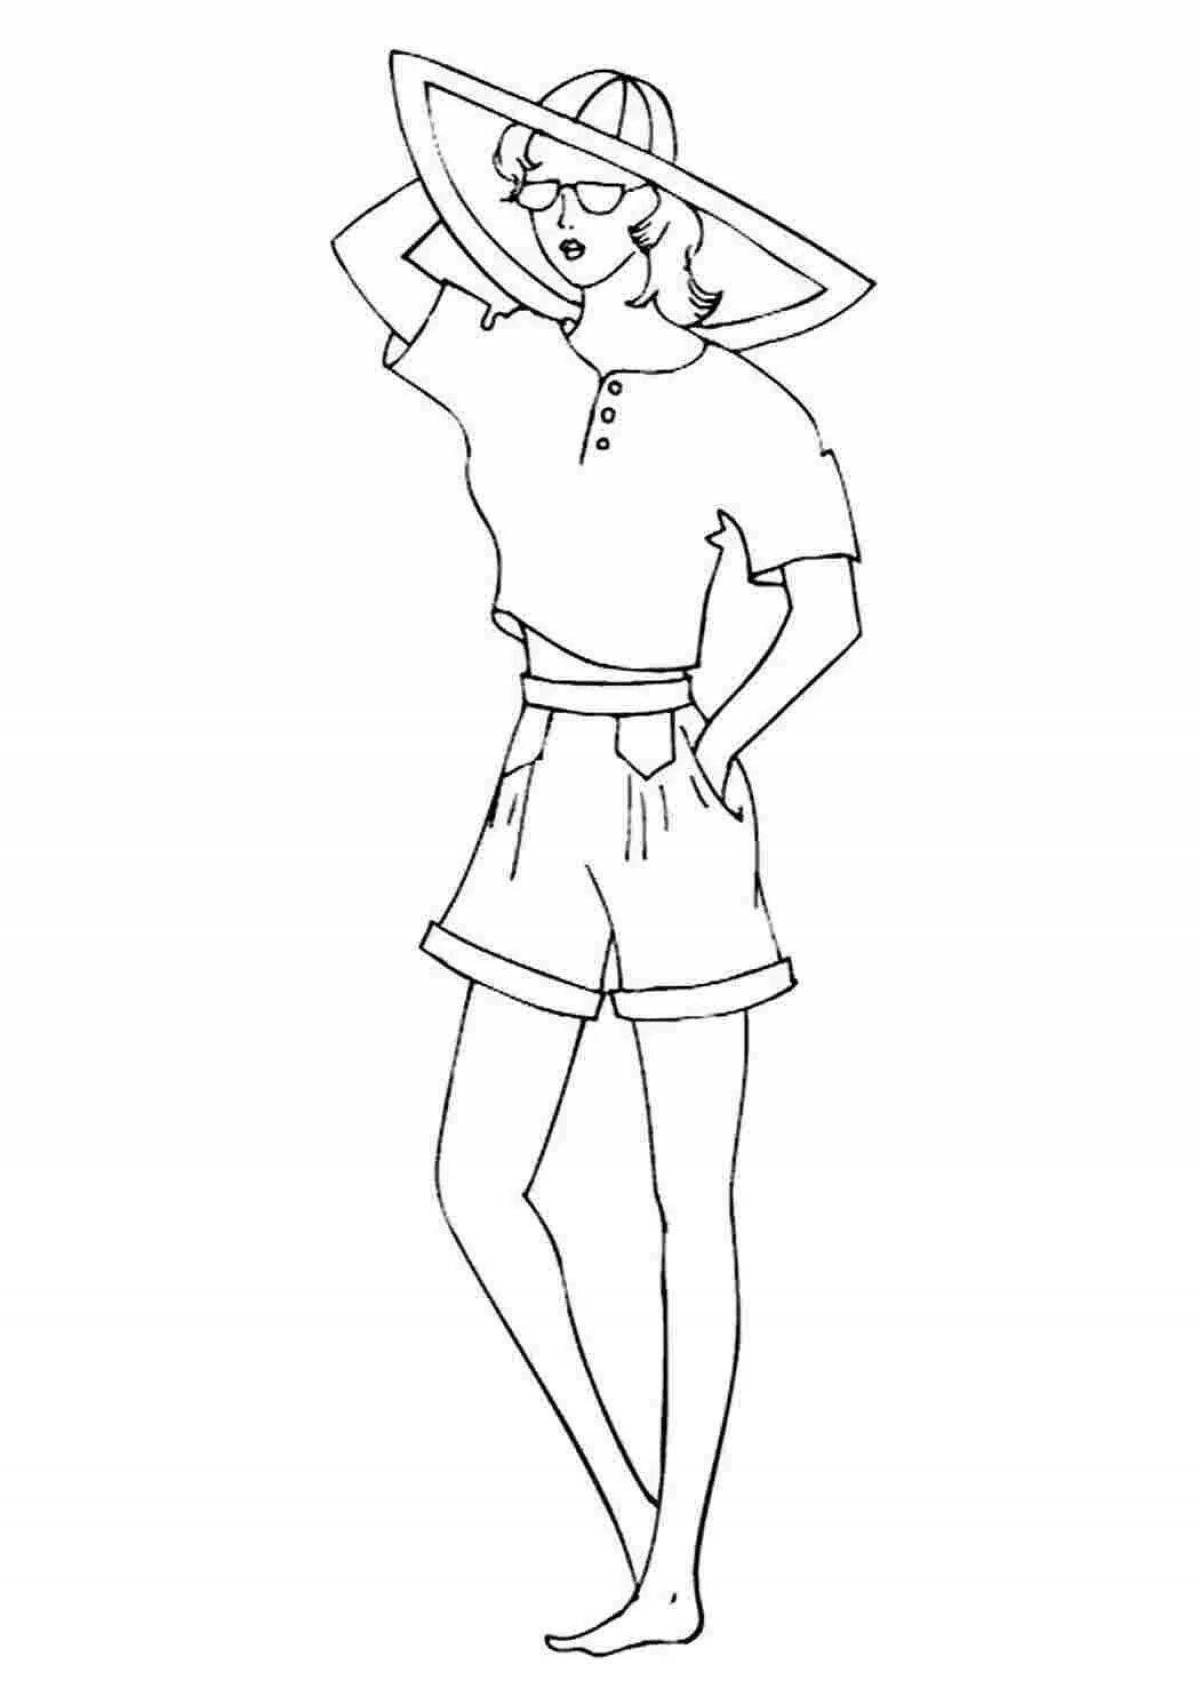 Serene coloring page full body woman